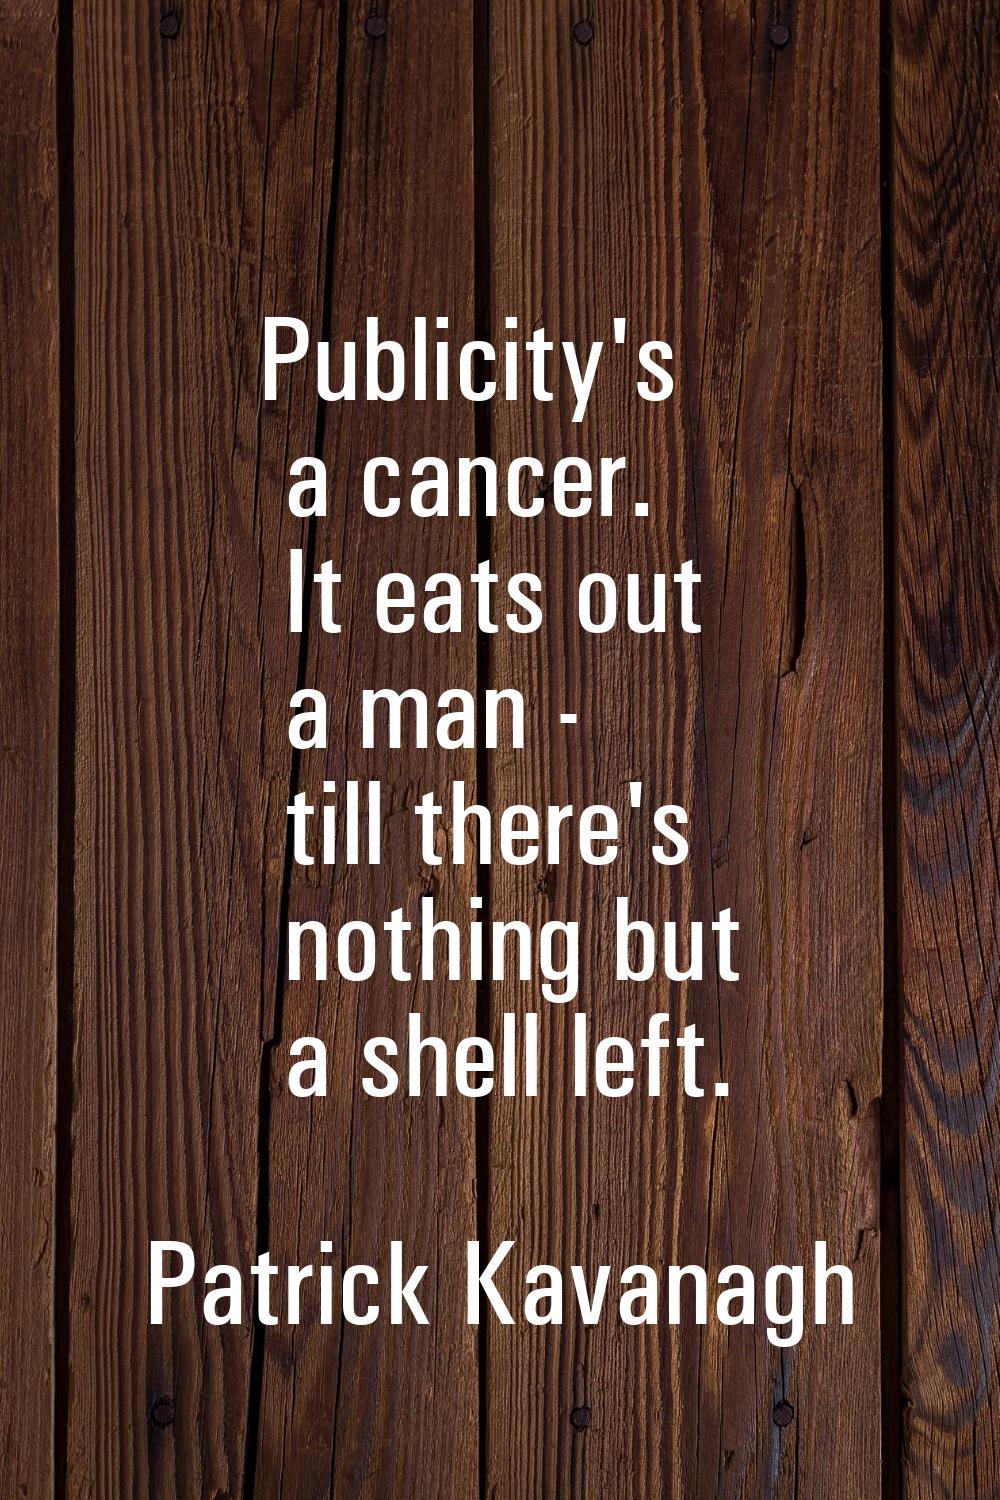 Publicity's a cancer. It eats out a man - till there's nothing but a shell left.